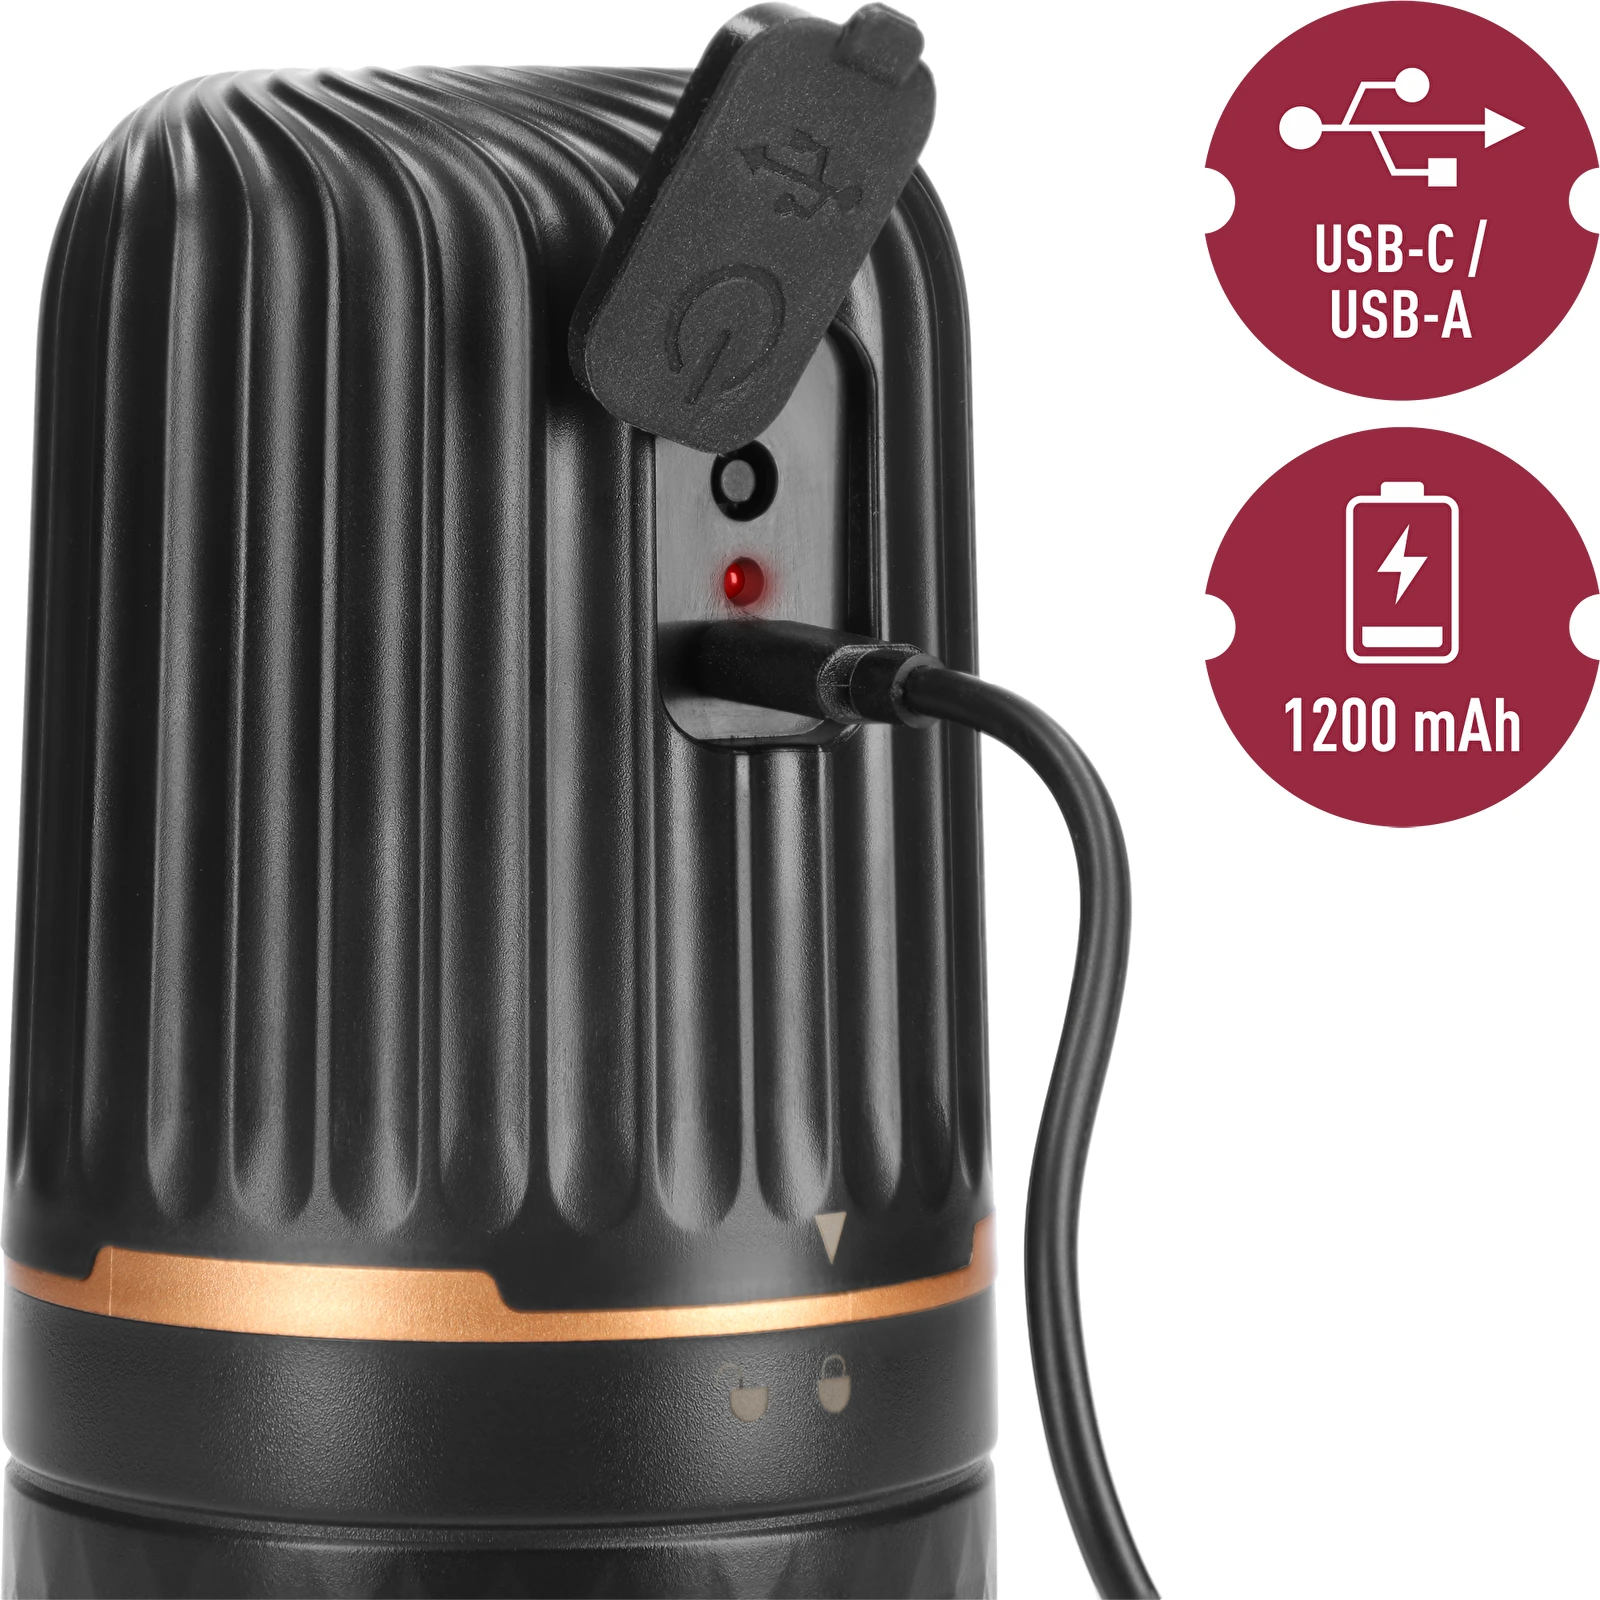 Outin Portable Cordless Electric Burr Coffee Grinder for $25 - CG-08